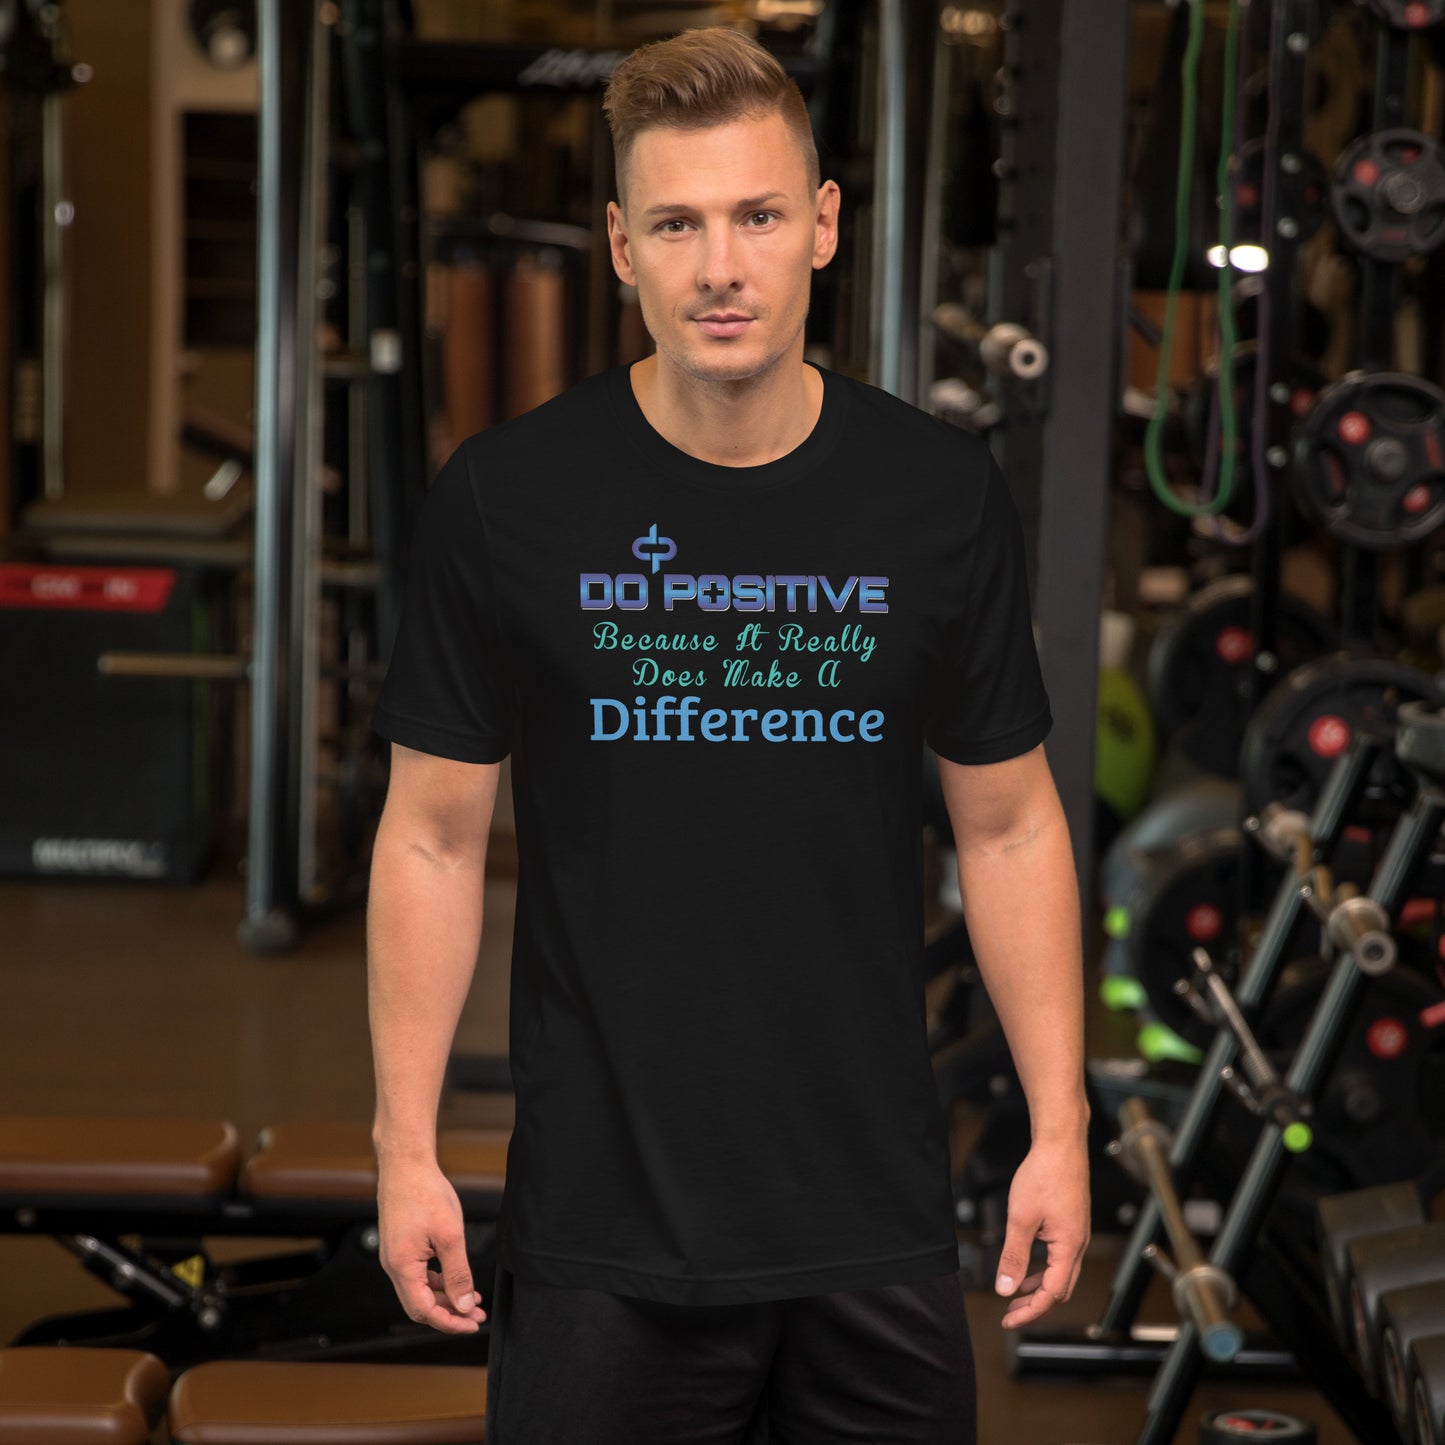 Do Positive Because It Really Does Make a Difference Men Short Sleeve T-shirt